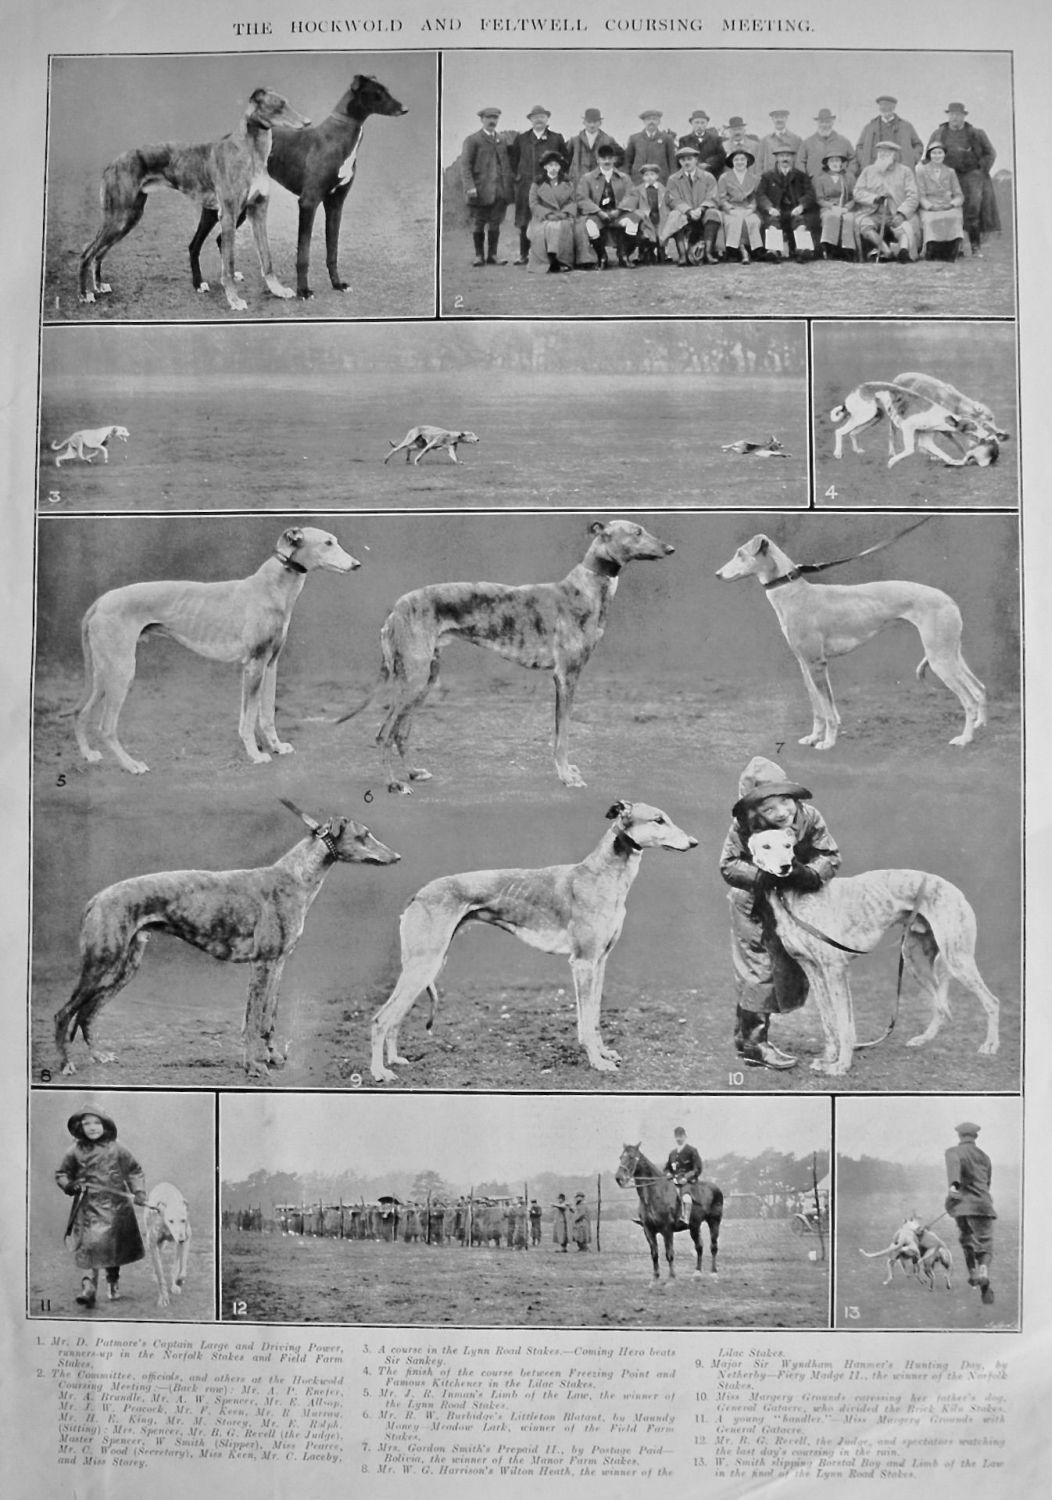 The Hockwold and Feltwell Coursing Meeting.  1915.